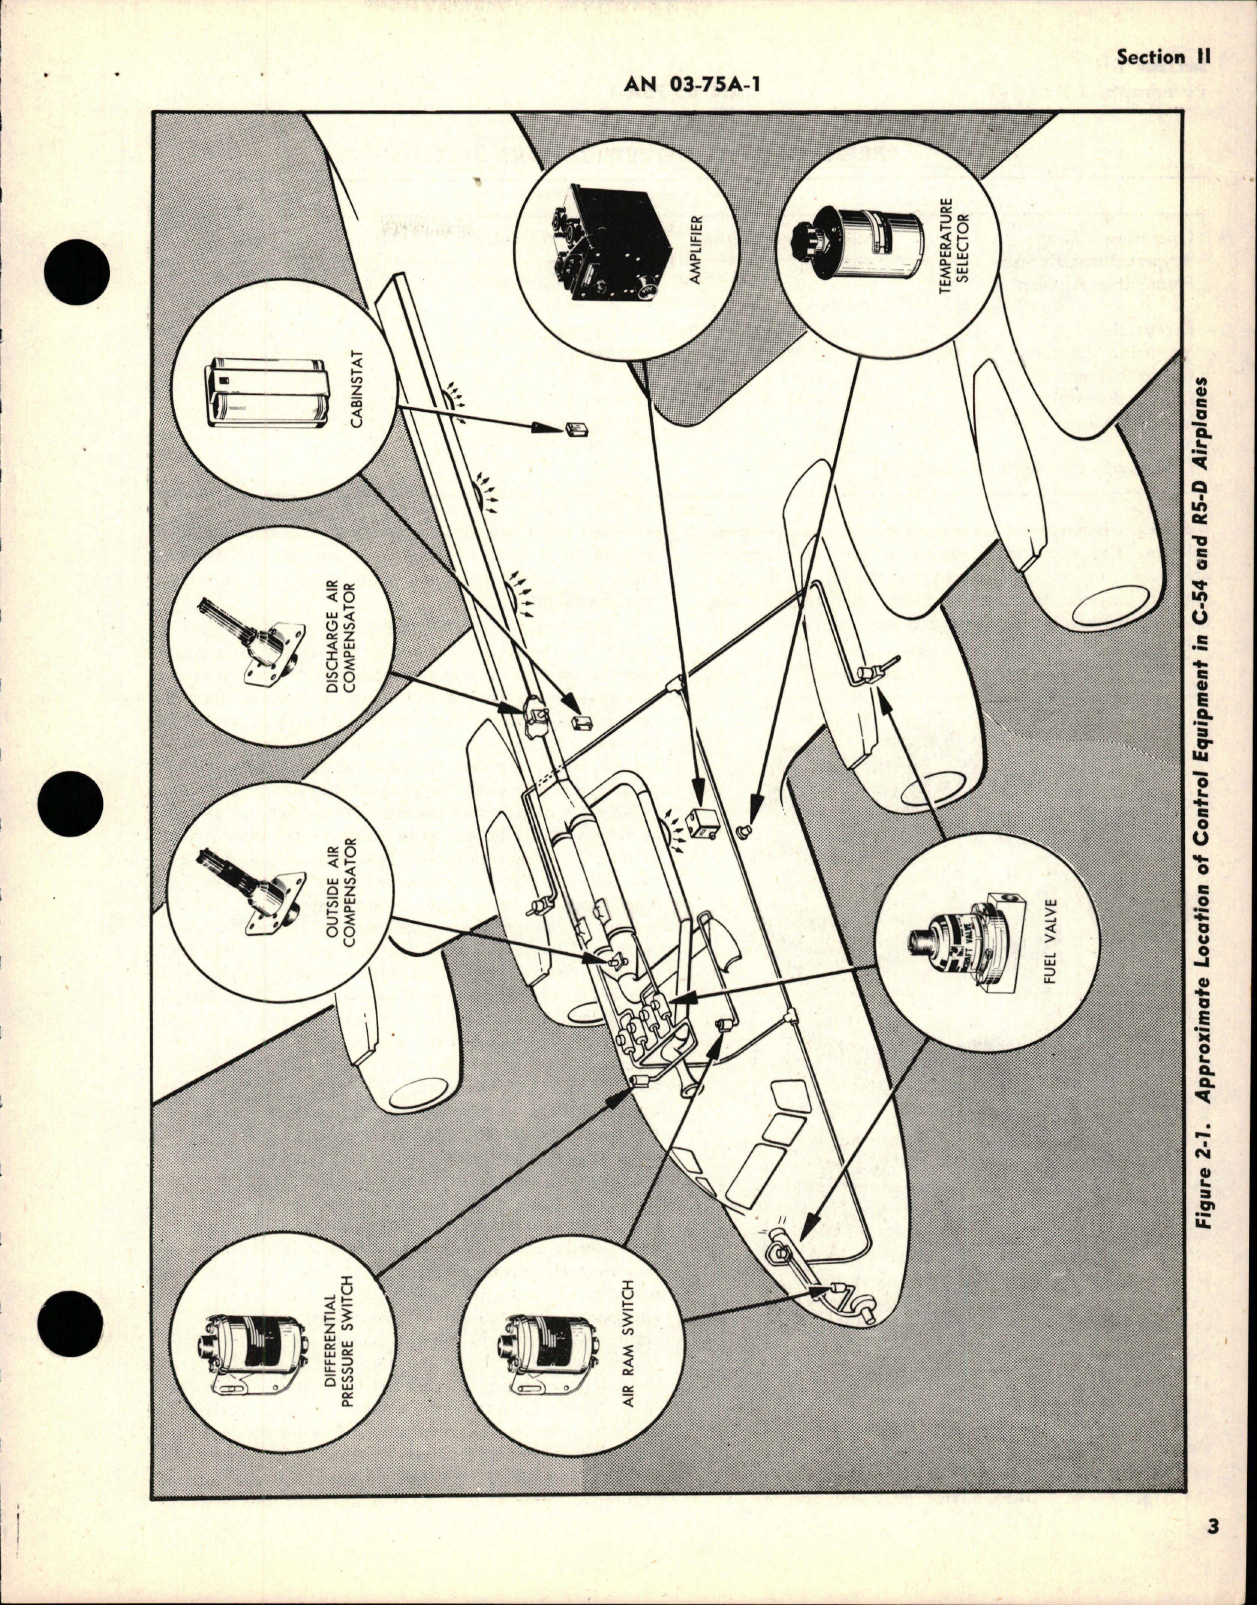 Sample page 7 from AirCorps Library document: Operation and Service Instructions for Cabin Temperature Control Systems - G1100 Series